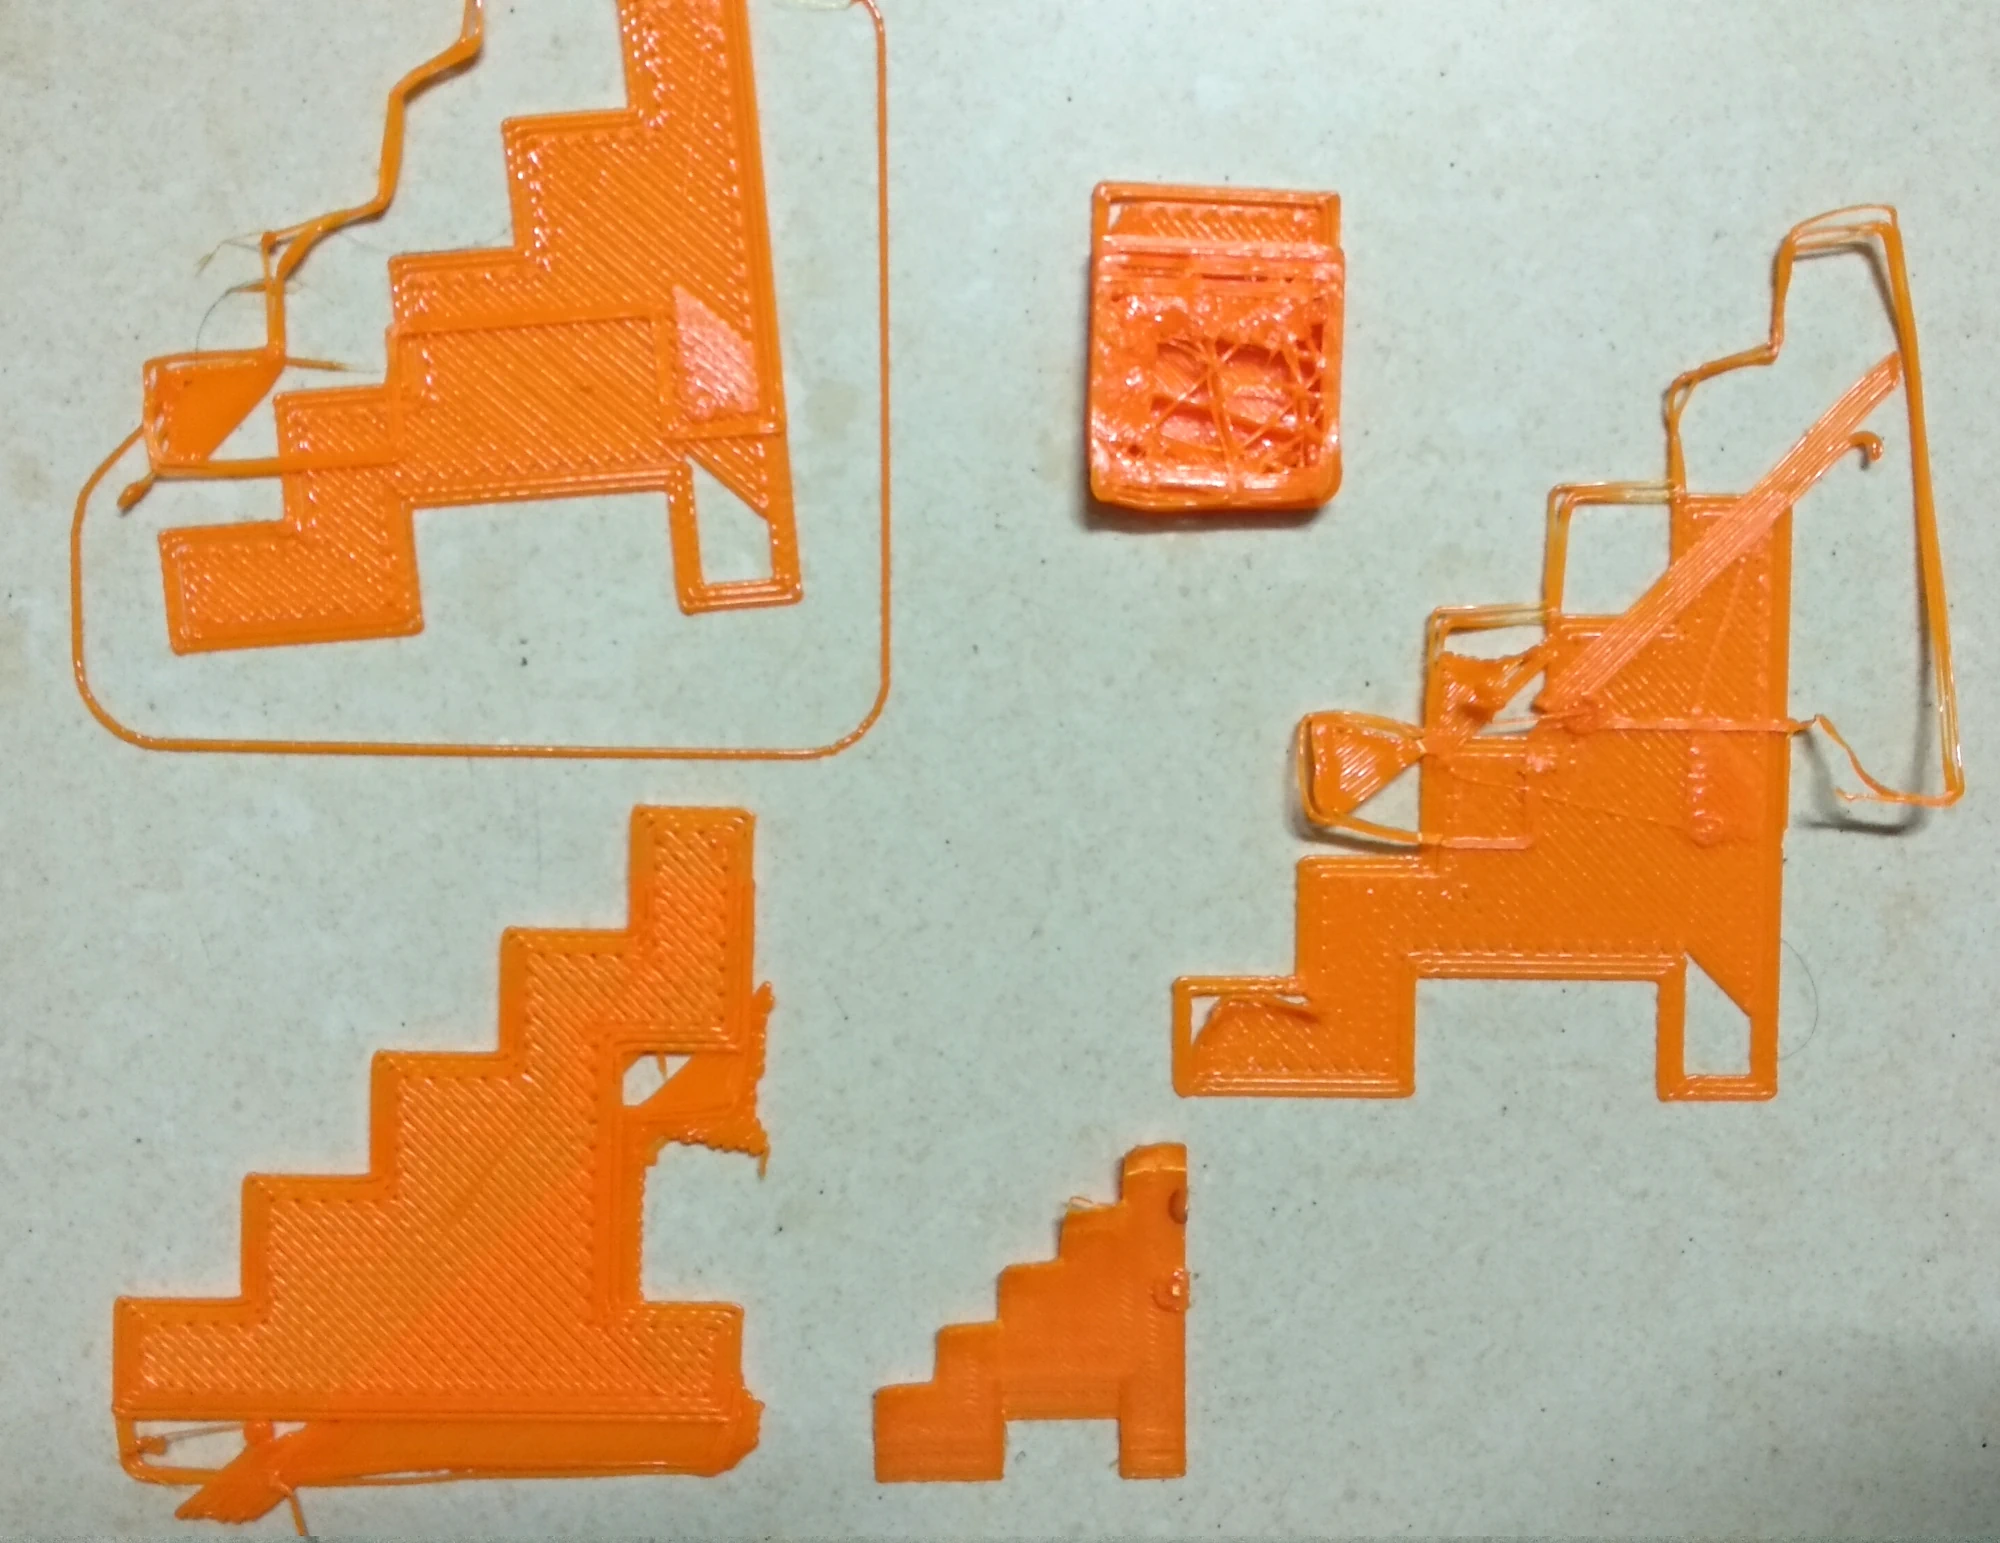 Multiple prints showing shifted layers